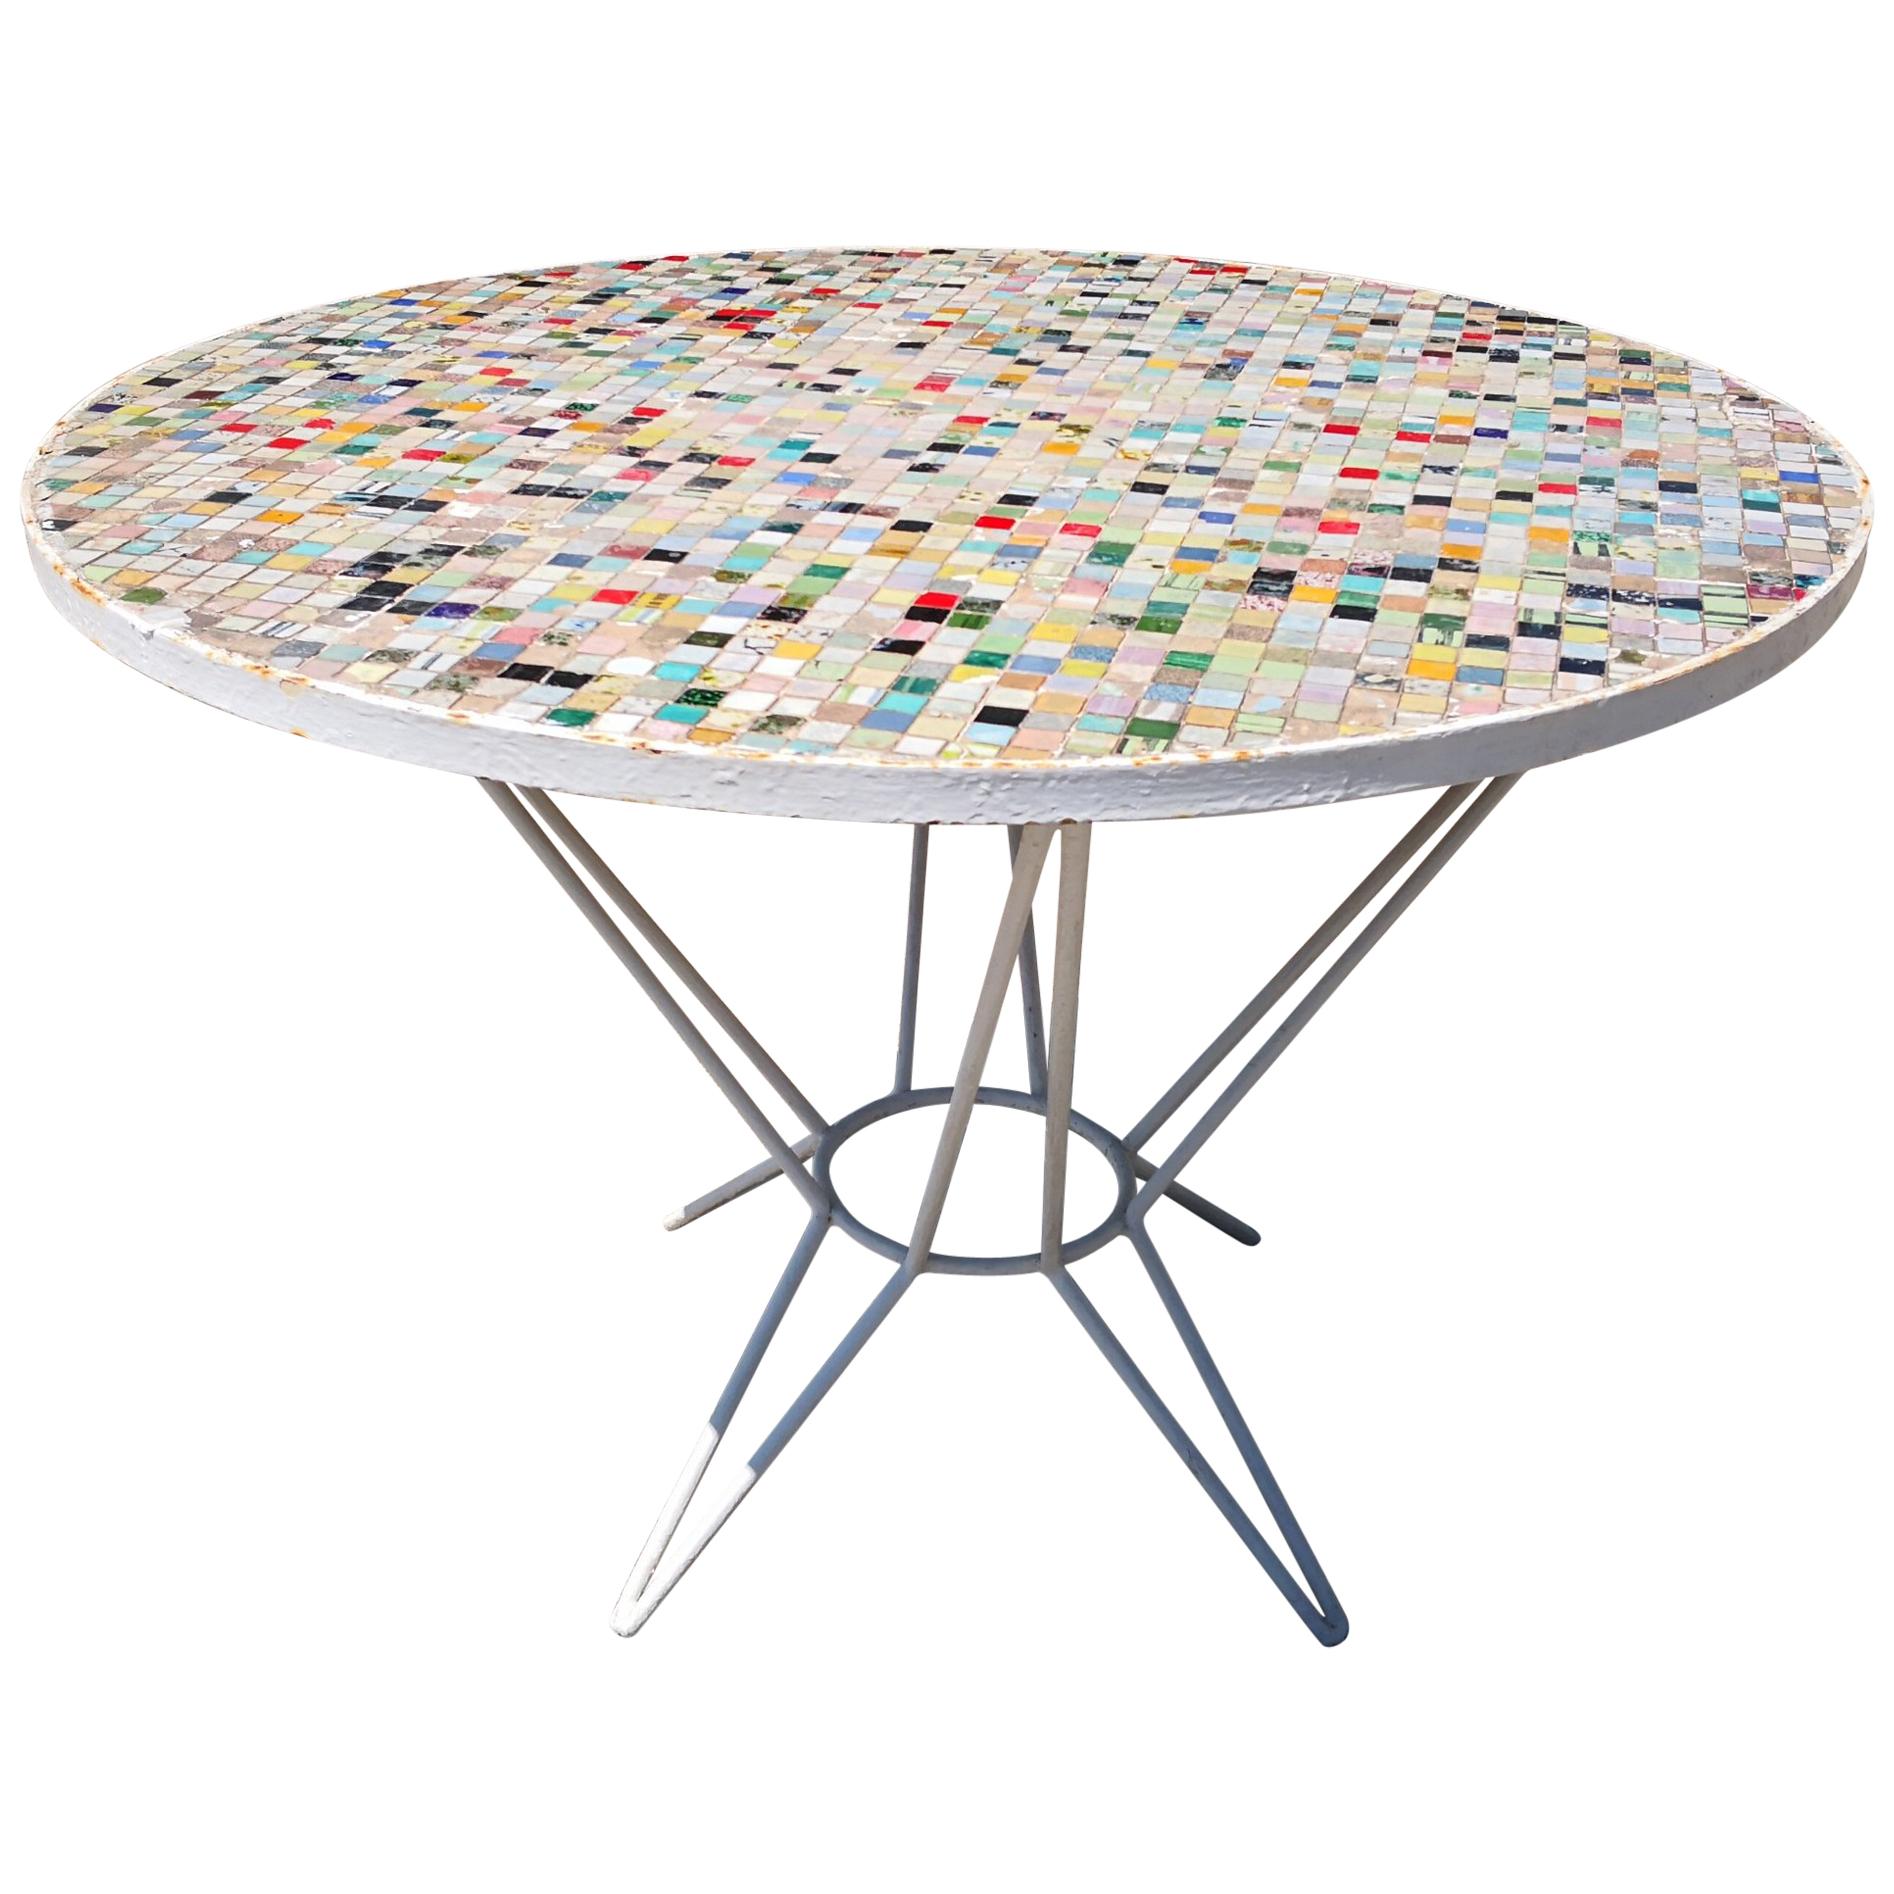 1970s Spanish Garden Glass Mosaic Table with Iron legs